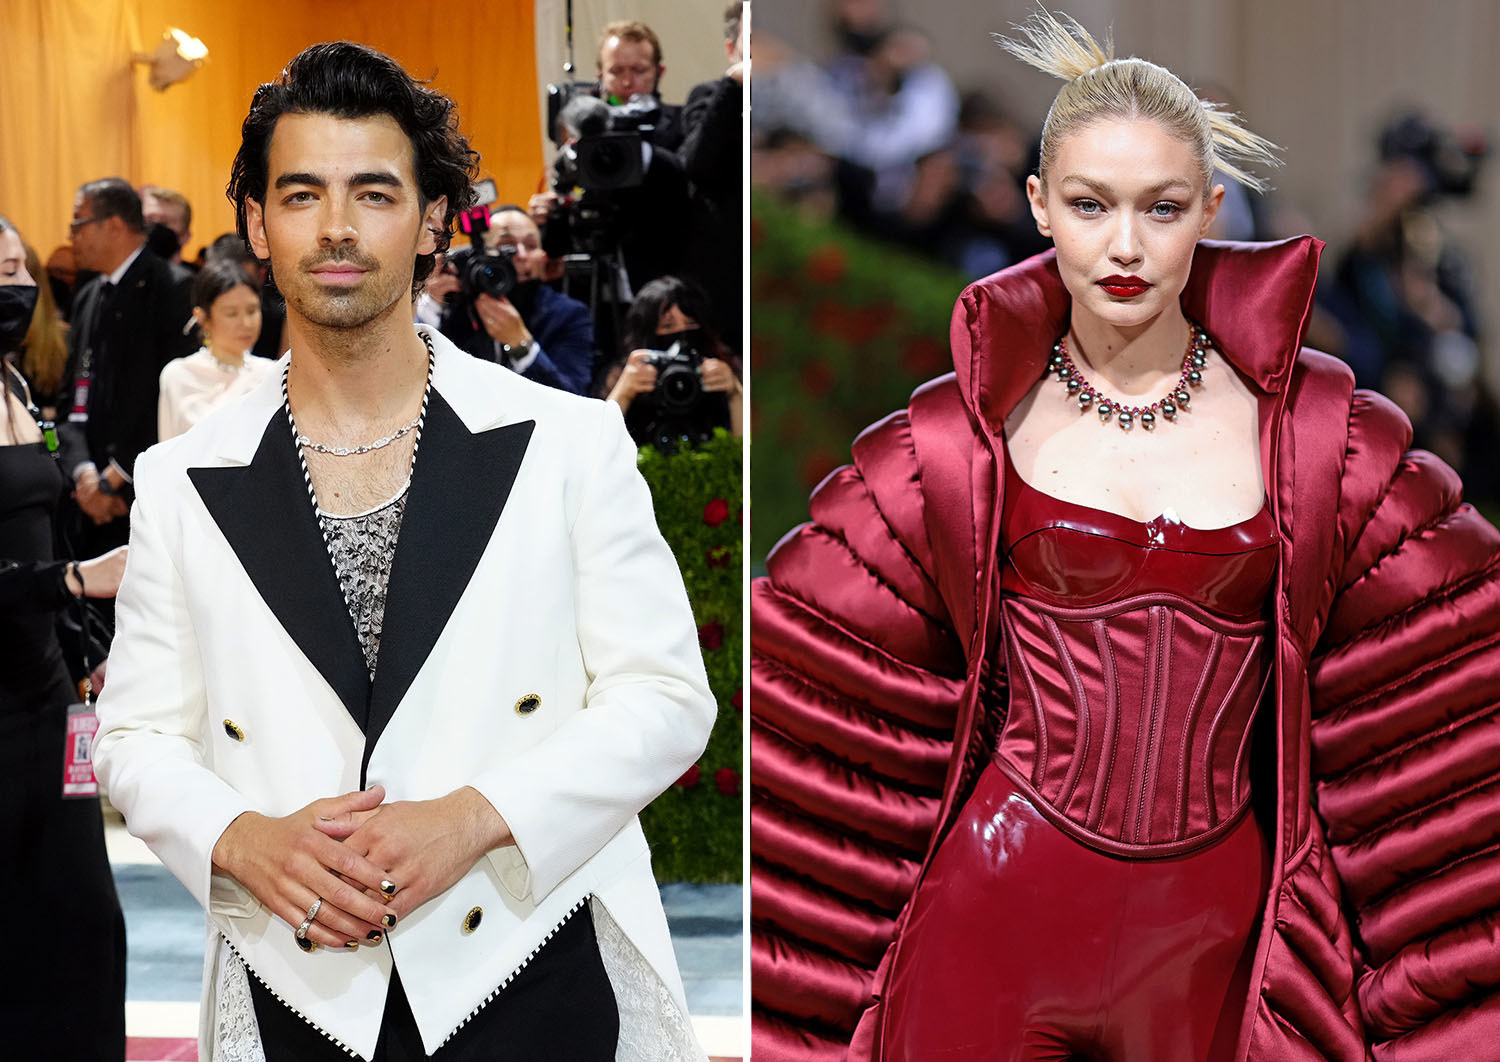 Joe Jonas smiles and wears a white jacket; Gigi Hadid poses in a monochrome outfit